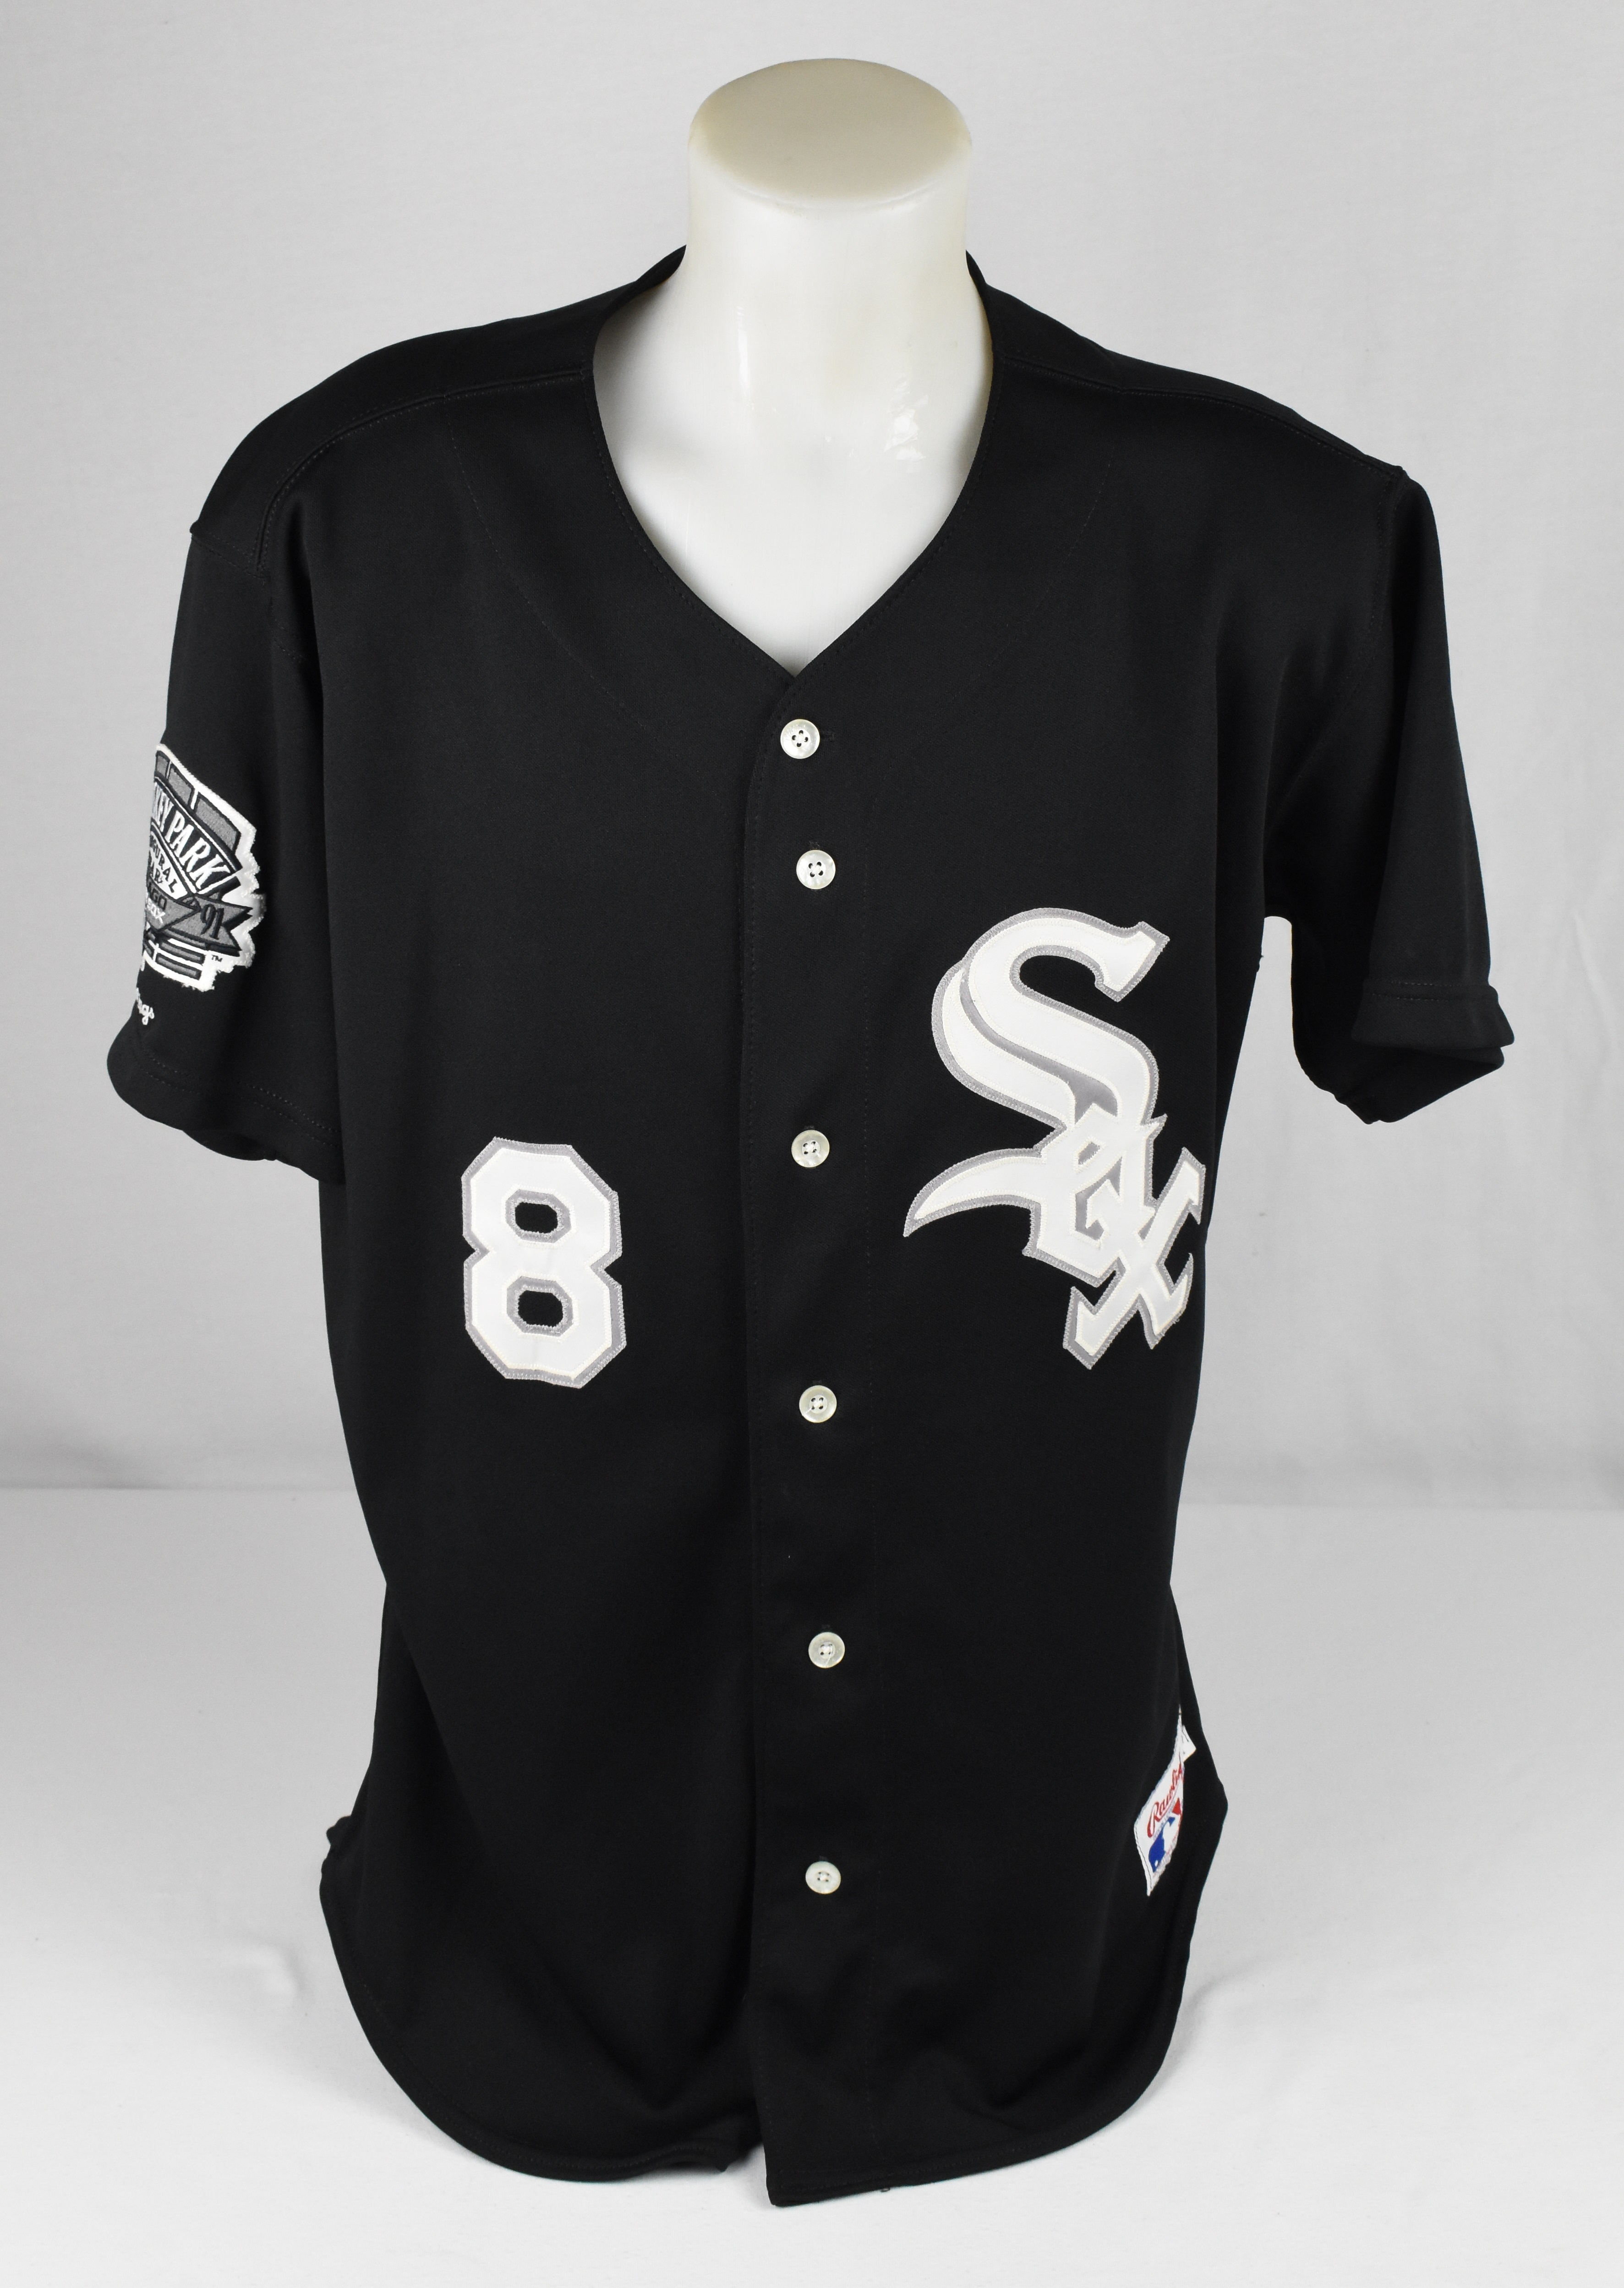 Lot Detail - Bo Jackson 1991 Chicago White Sox Game Used & Autographed  Jersey w/Dave Miedema LOA